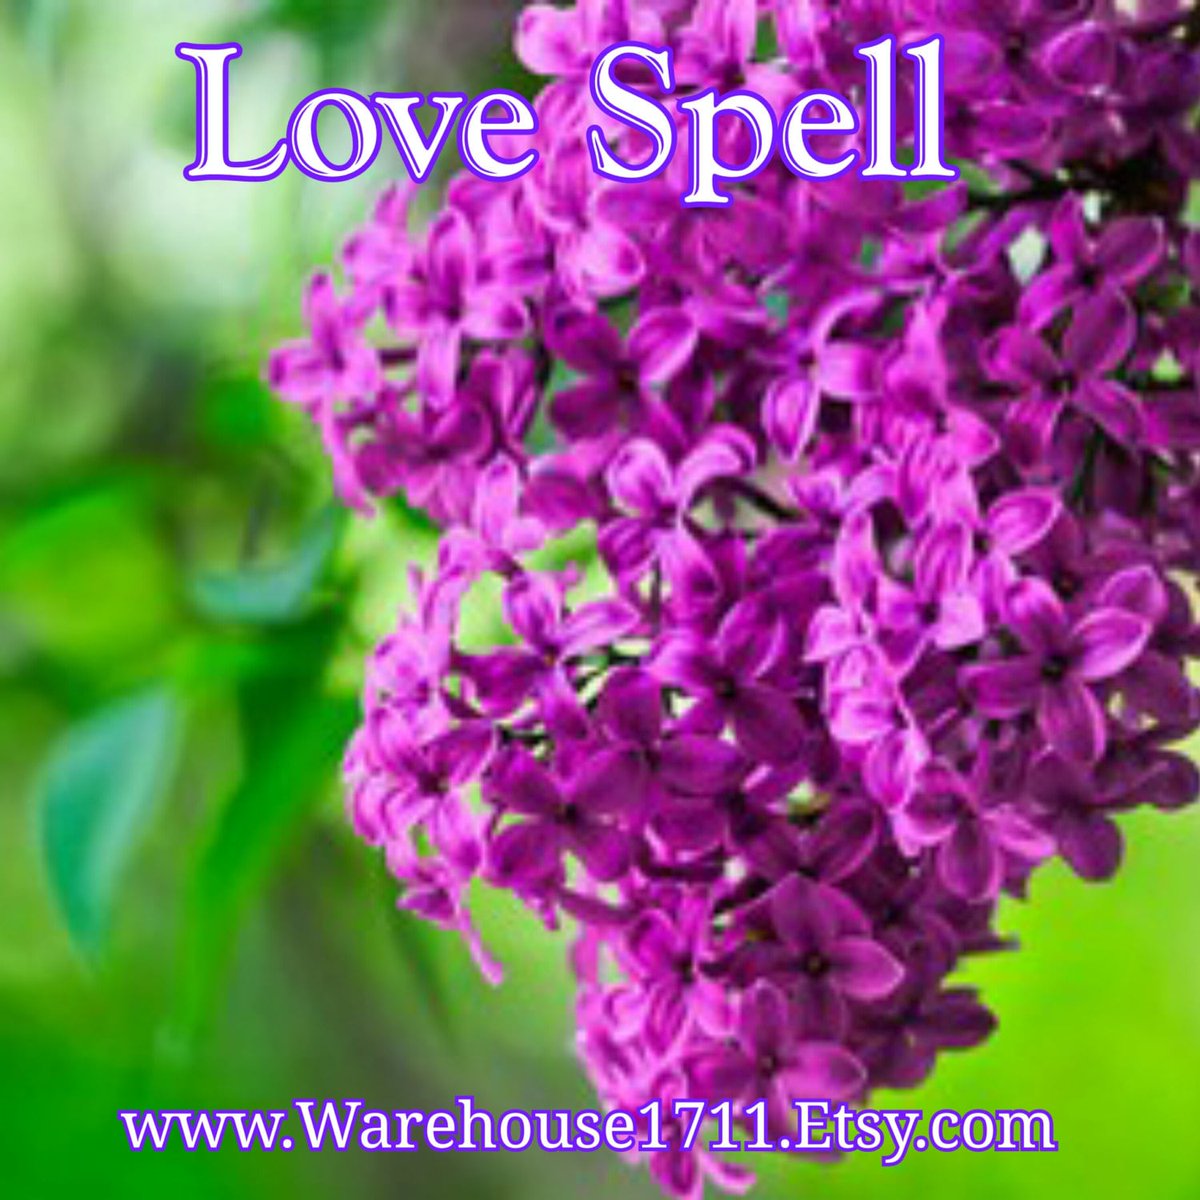 Love Spell Candle/Bath/Body Fragrance Oil tuppu.net/c318772 #glitter #dtftransfers #handmadecandles #explorepage #Warehouse1711 #aromatheraphy #candlemaker #candleoils #AromaOils